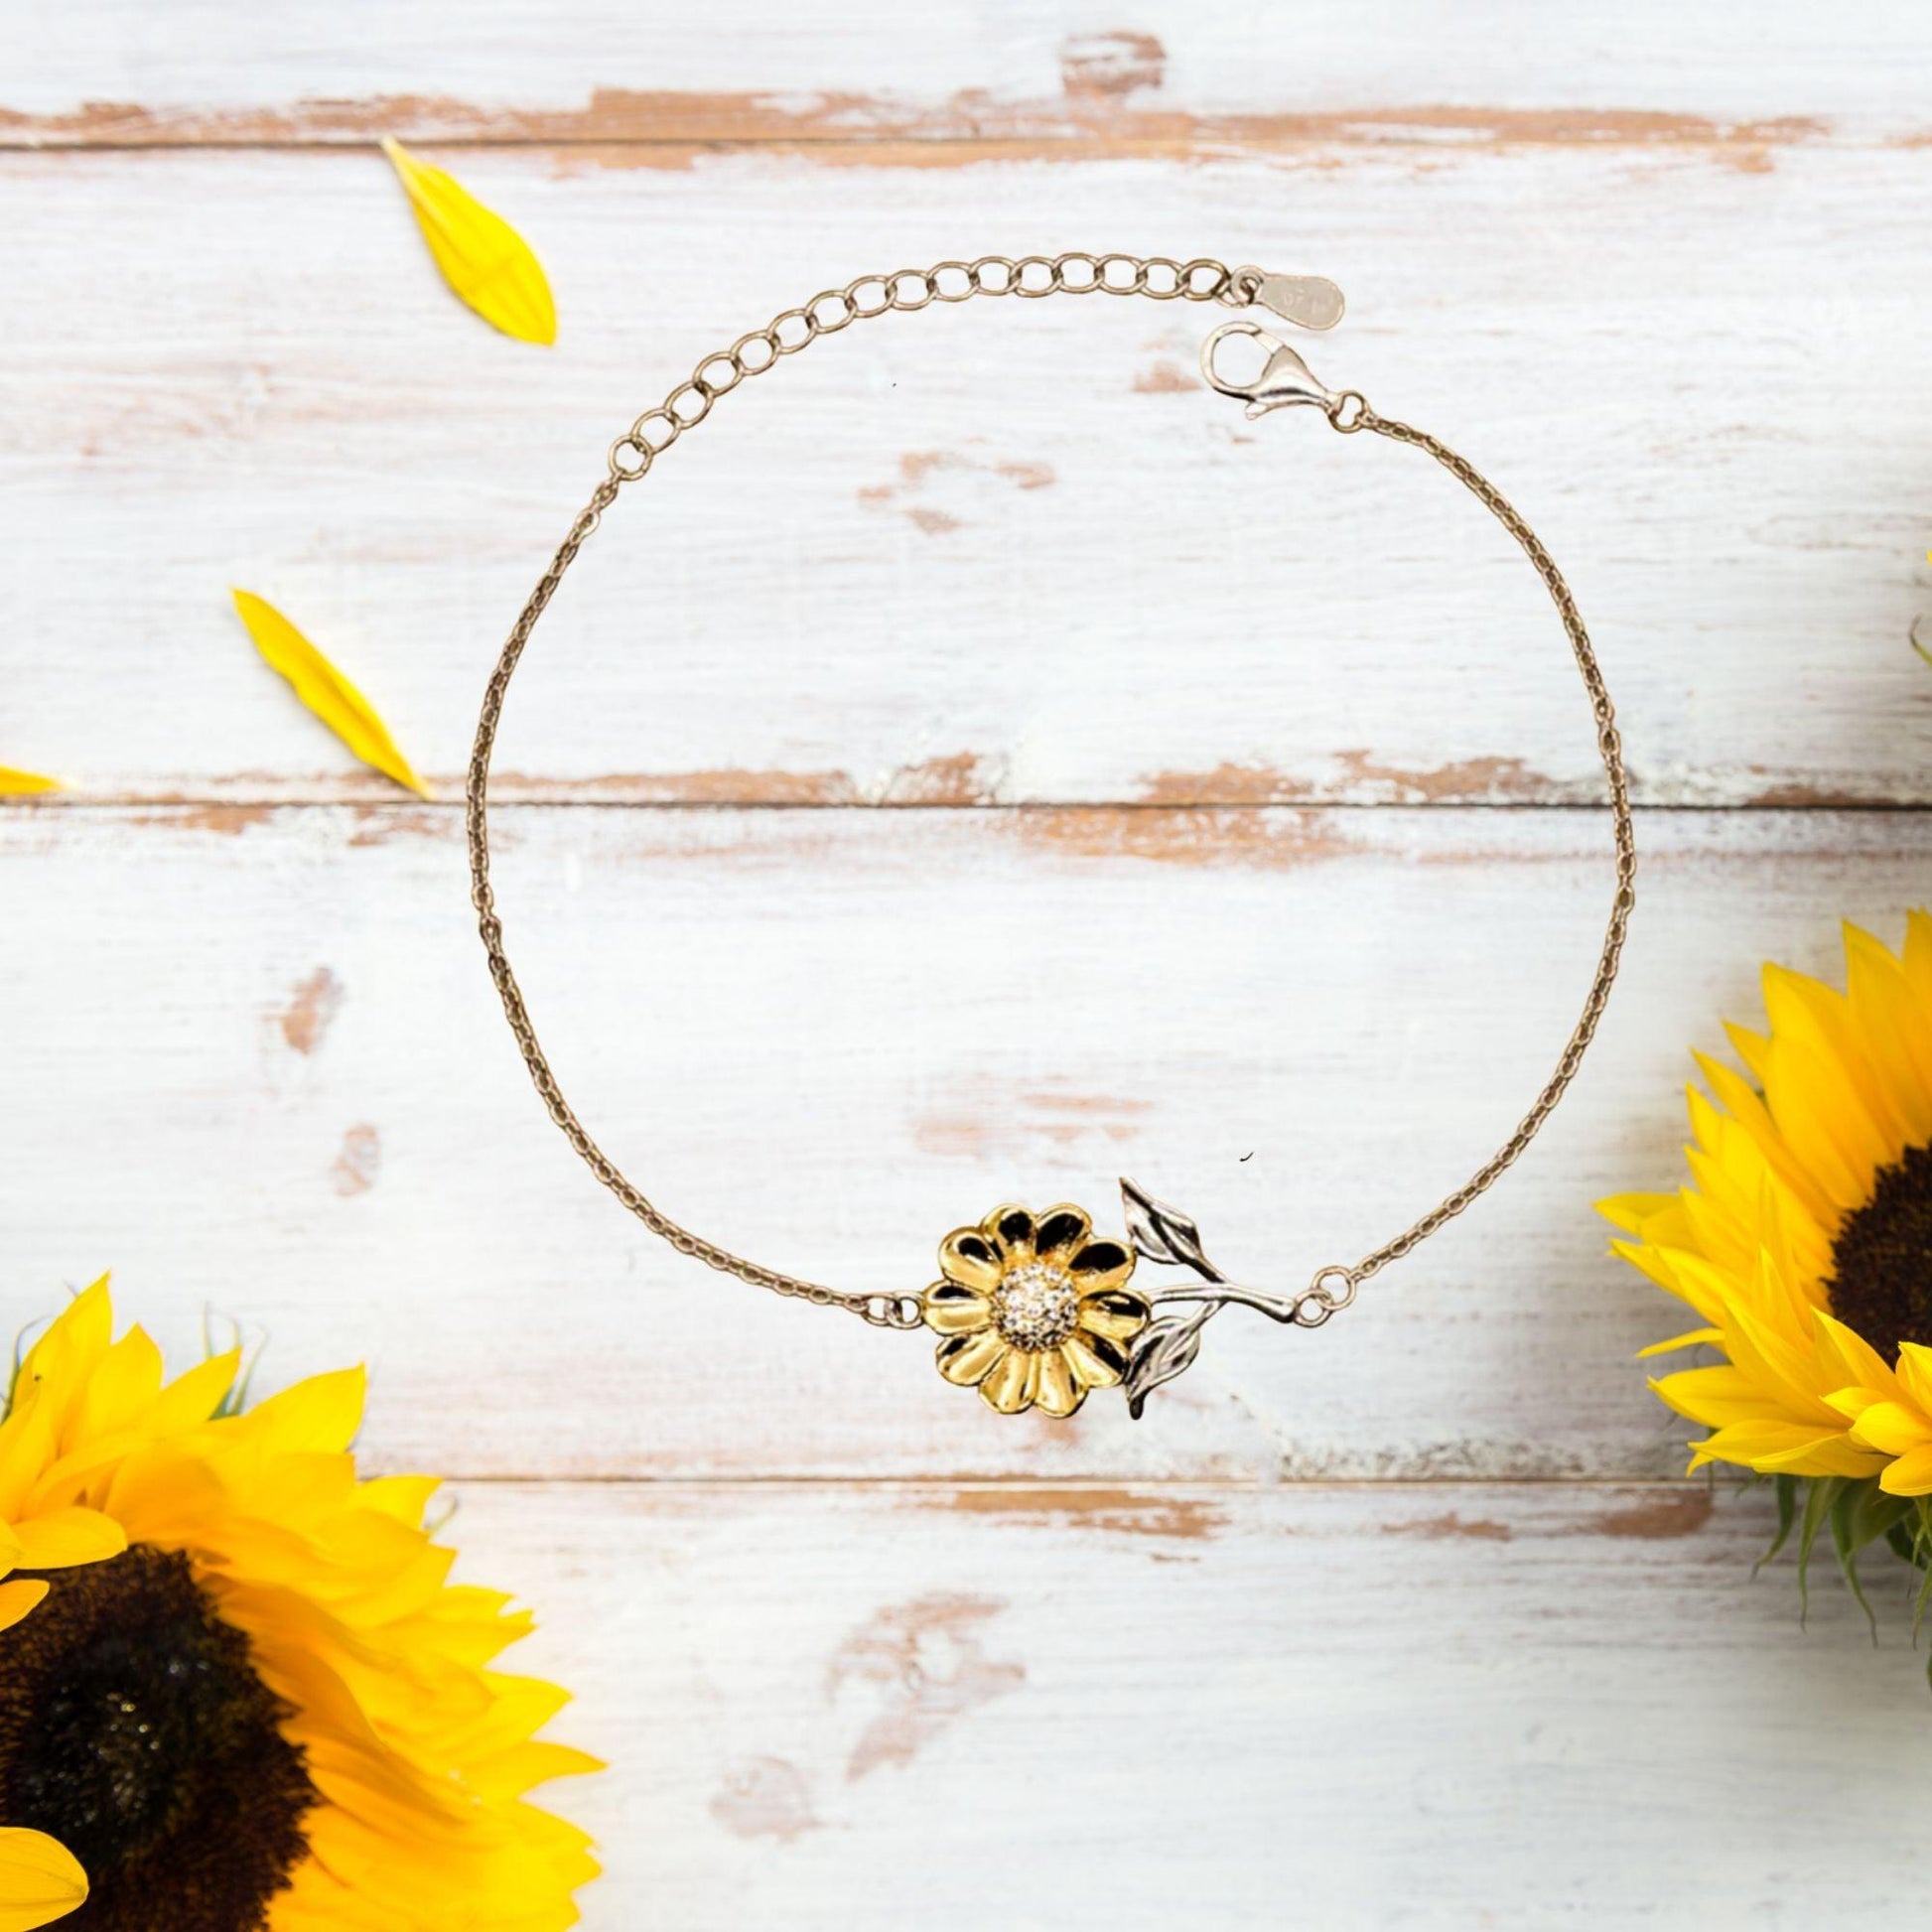 Remarkable CPA Gifts, Your dedication and hard work, Inspirational Birthday Christmas Unique Sunflower Bracelet For CPA, Coworkers, Men, Women, Friends - Mallard Moon Gift Shop